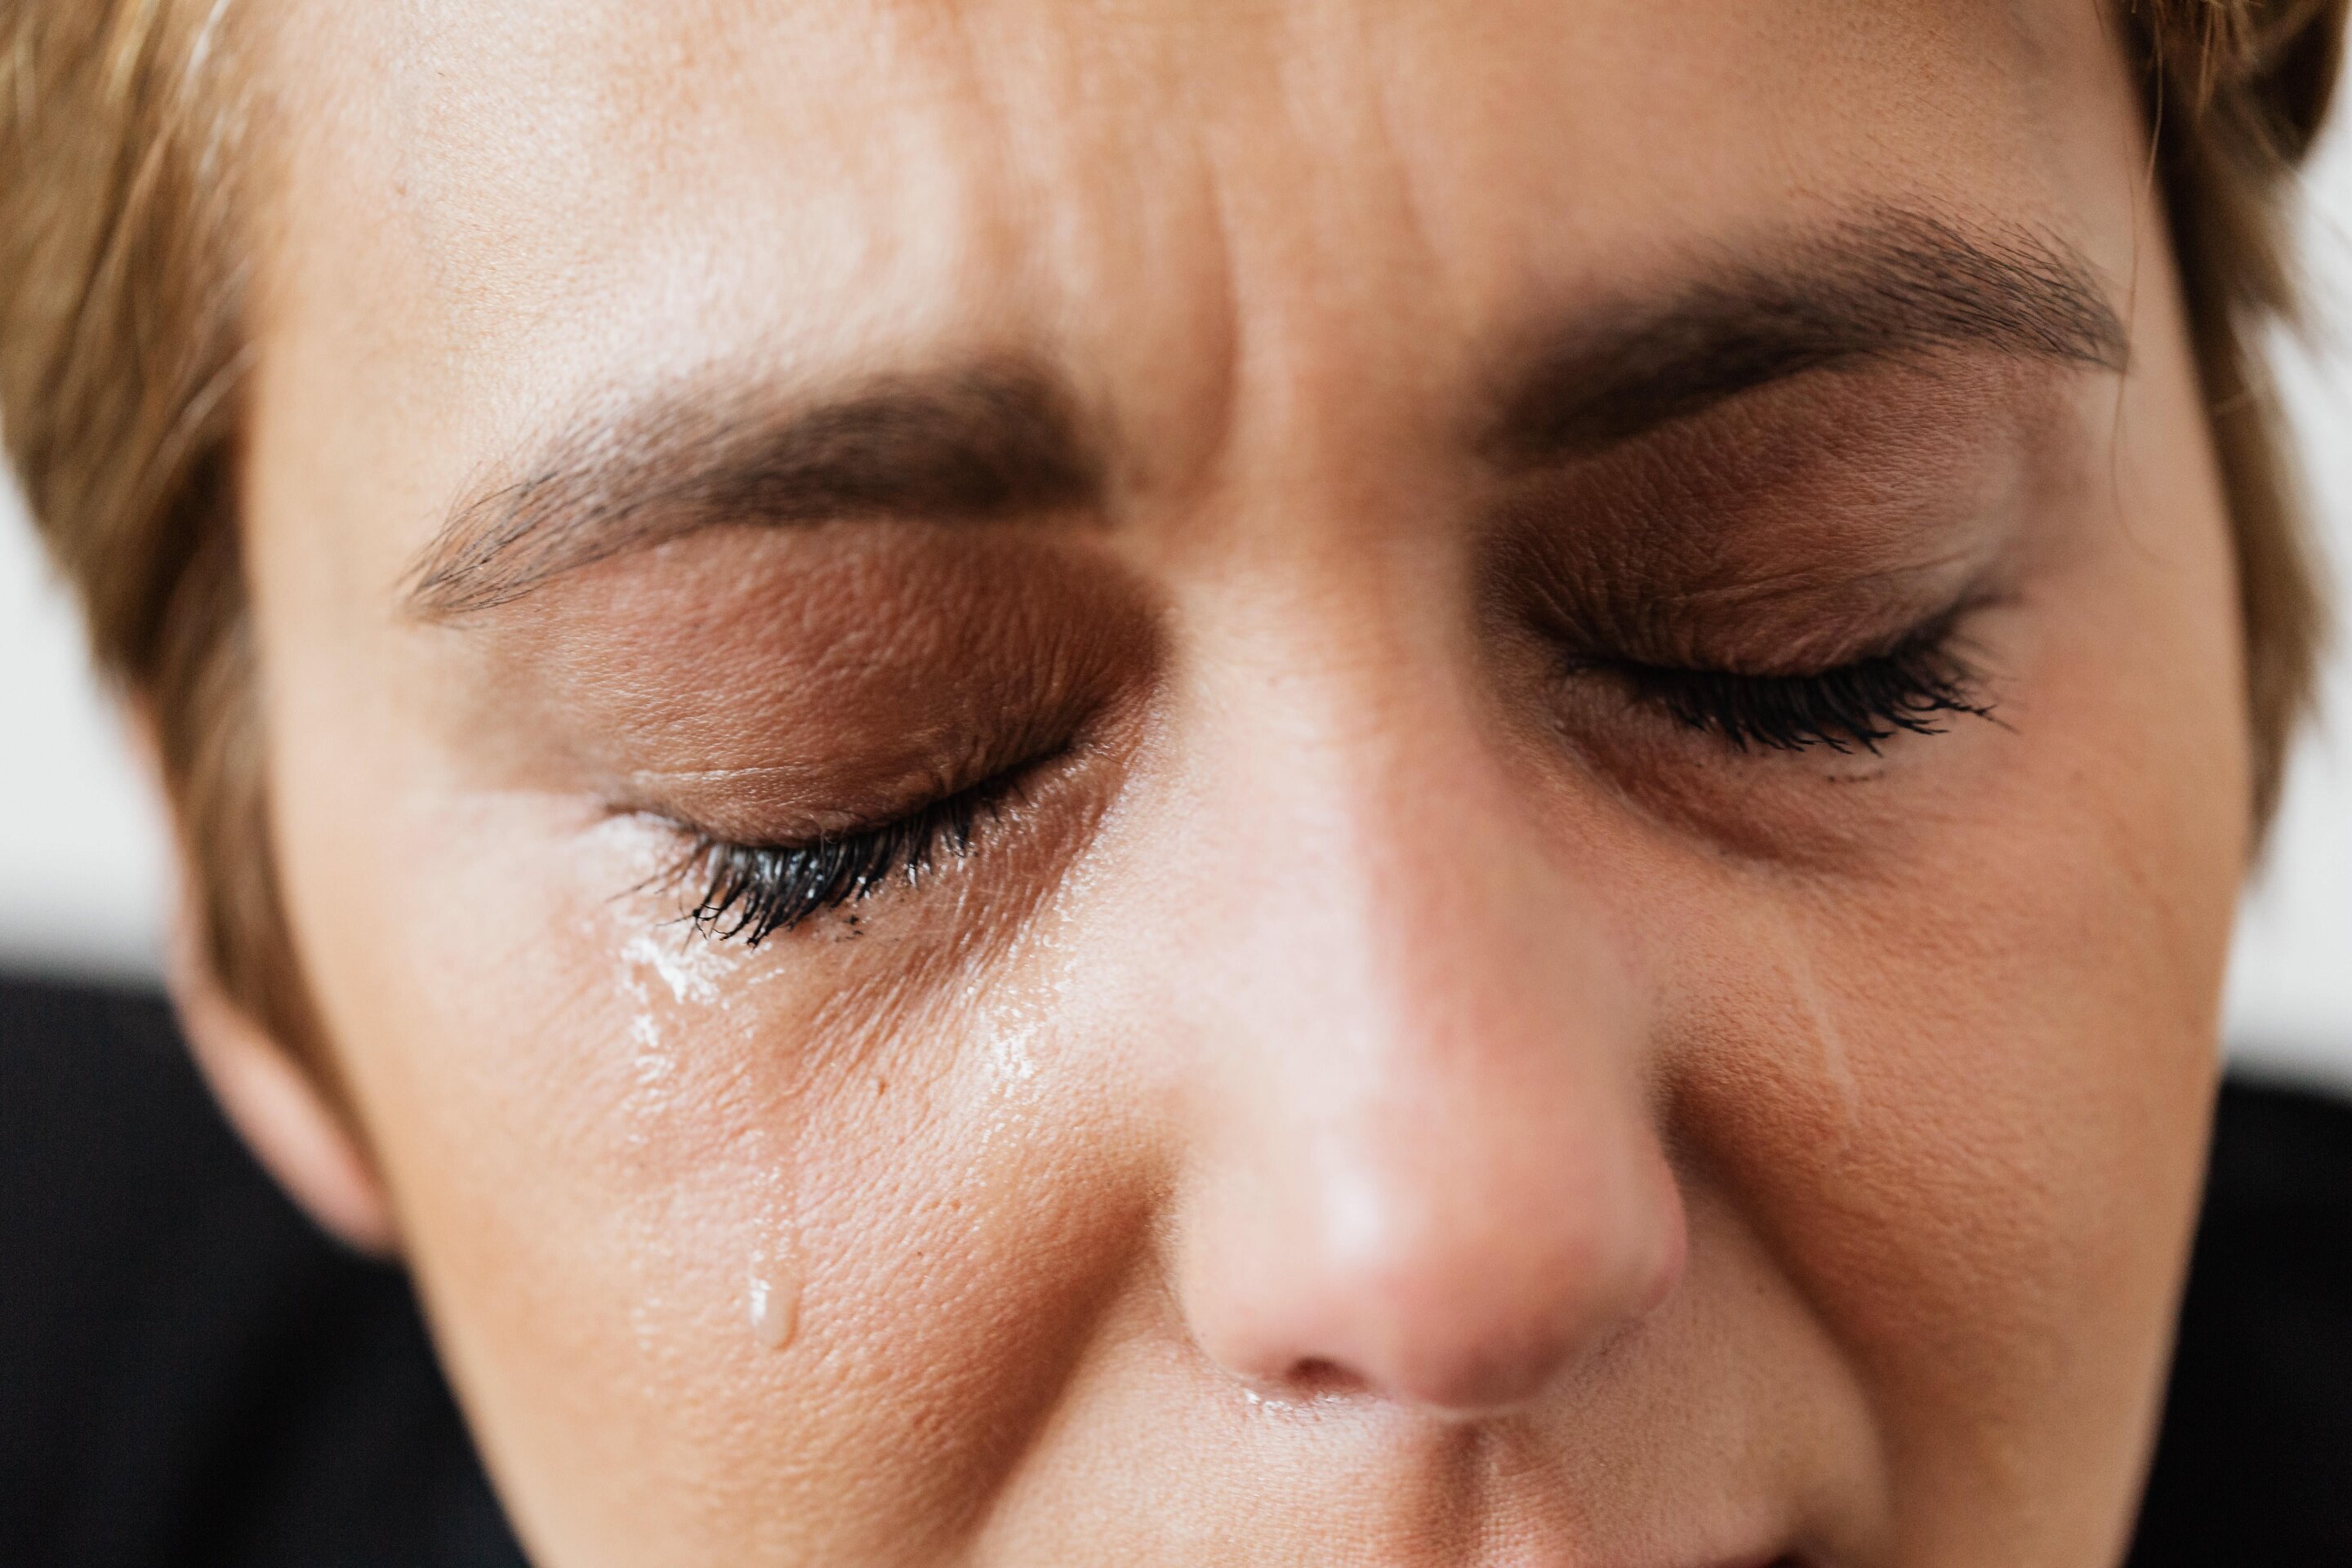 #A whiff of tears reduces male aggression, says study